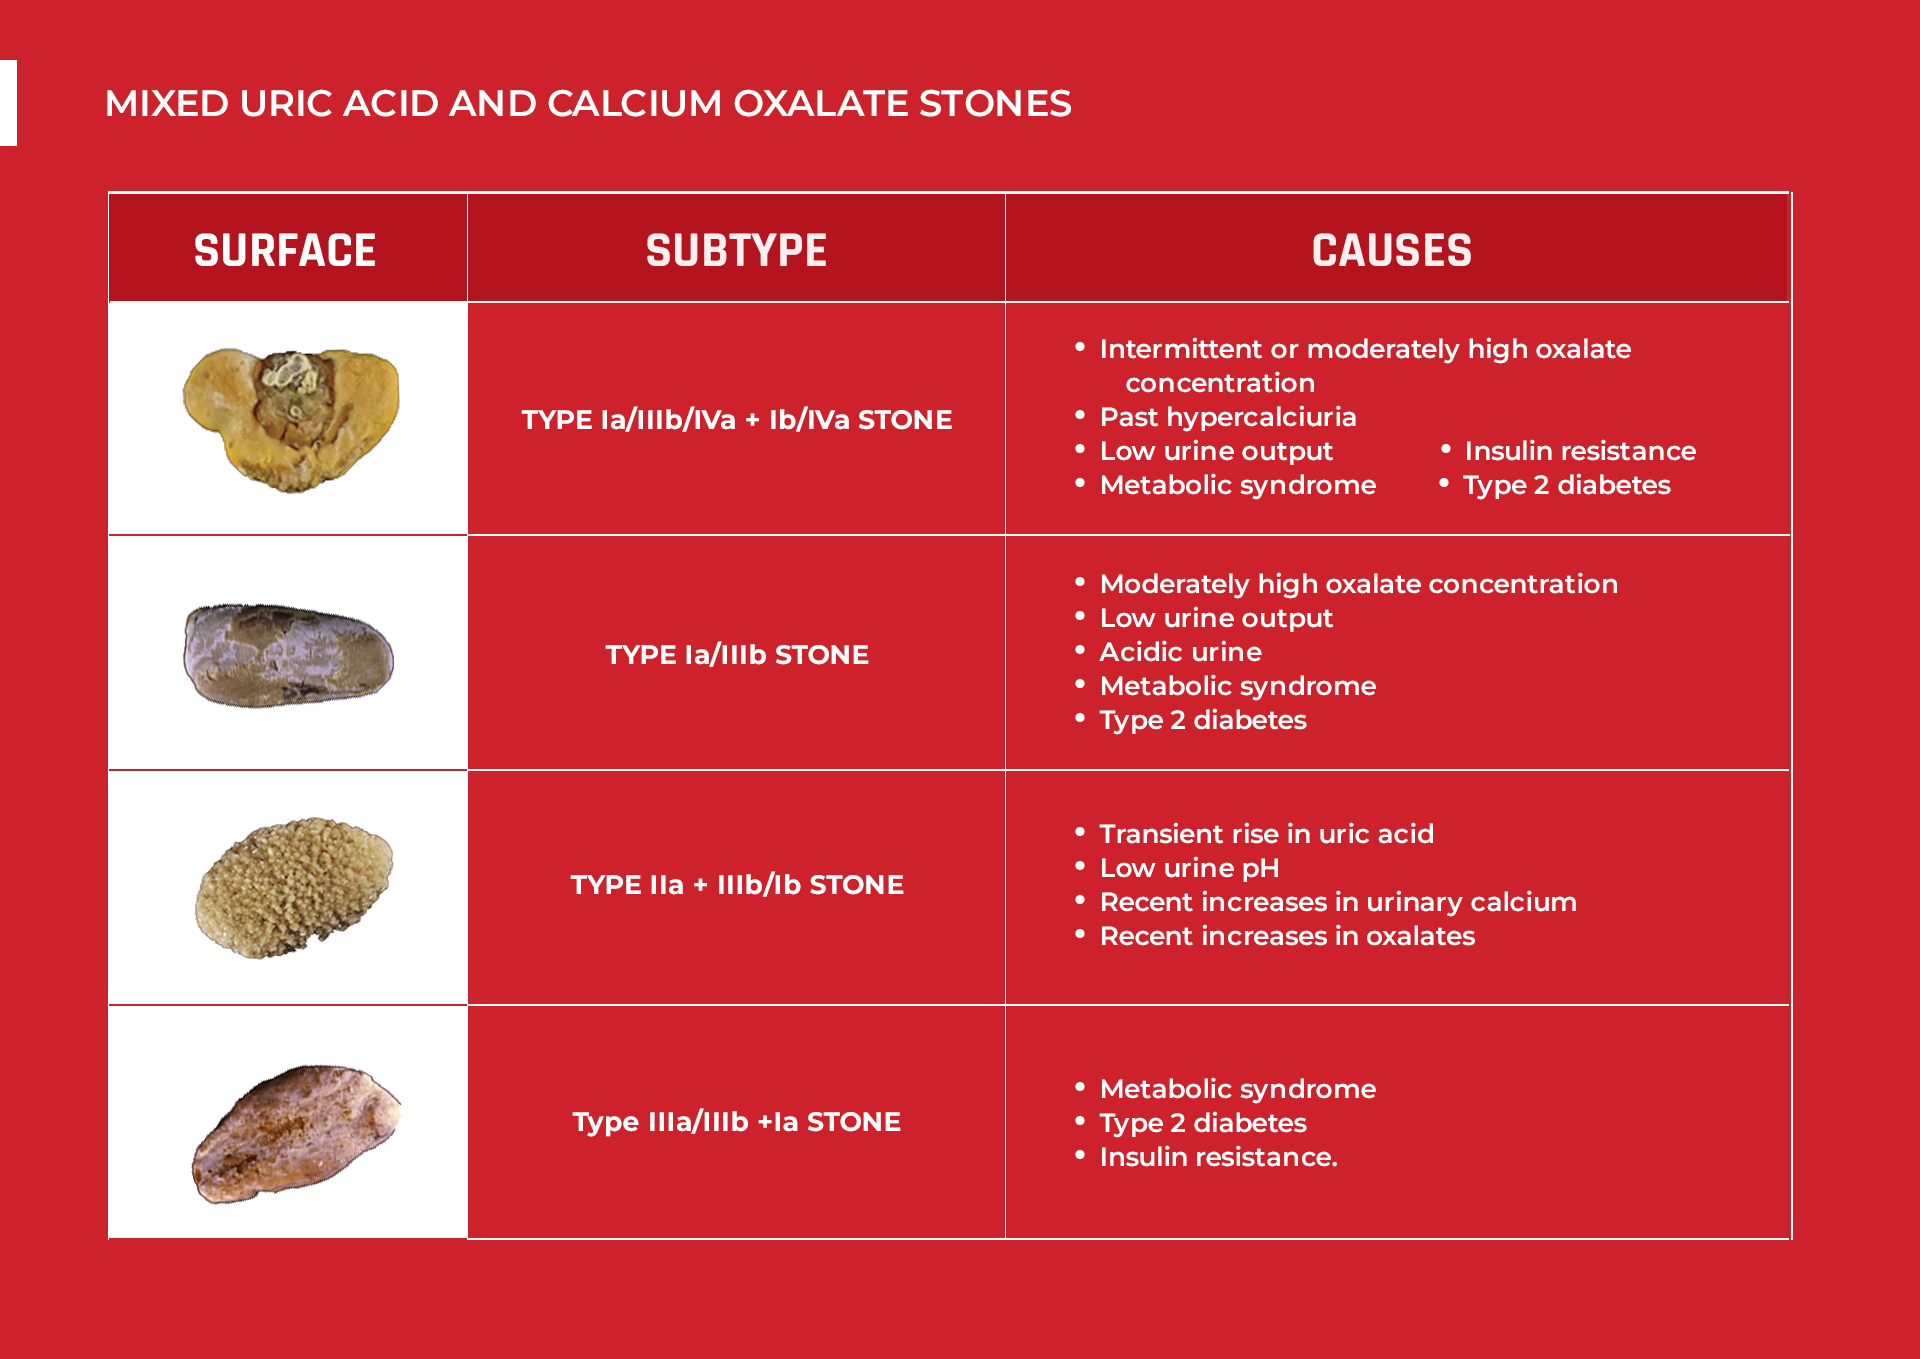 Mixed Uric Acid and Calcium Oxalate Subtypes